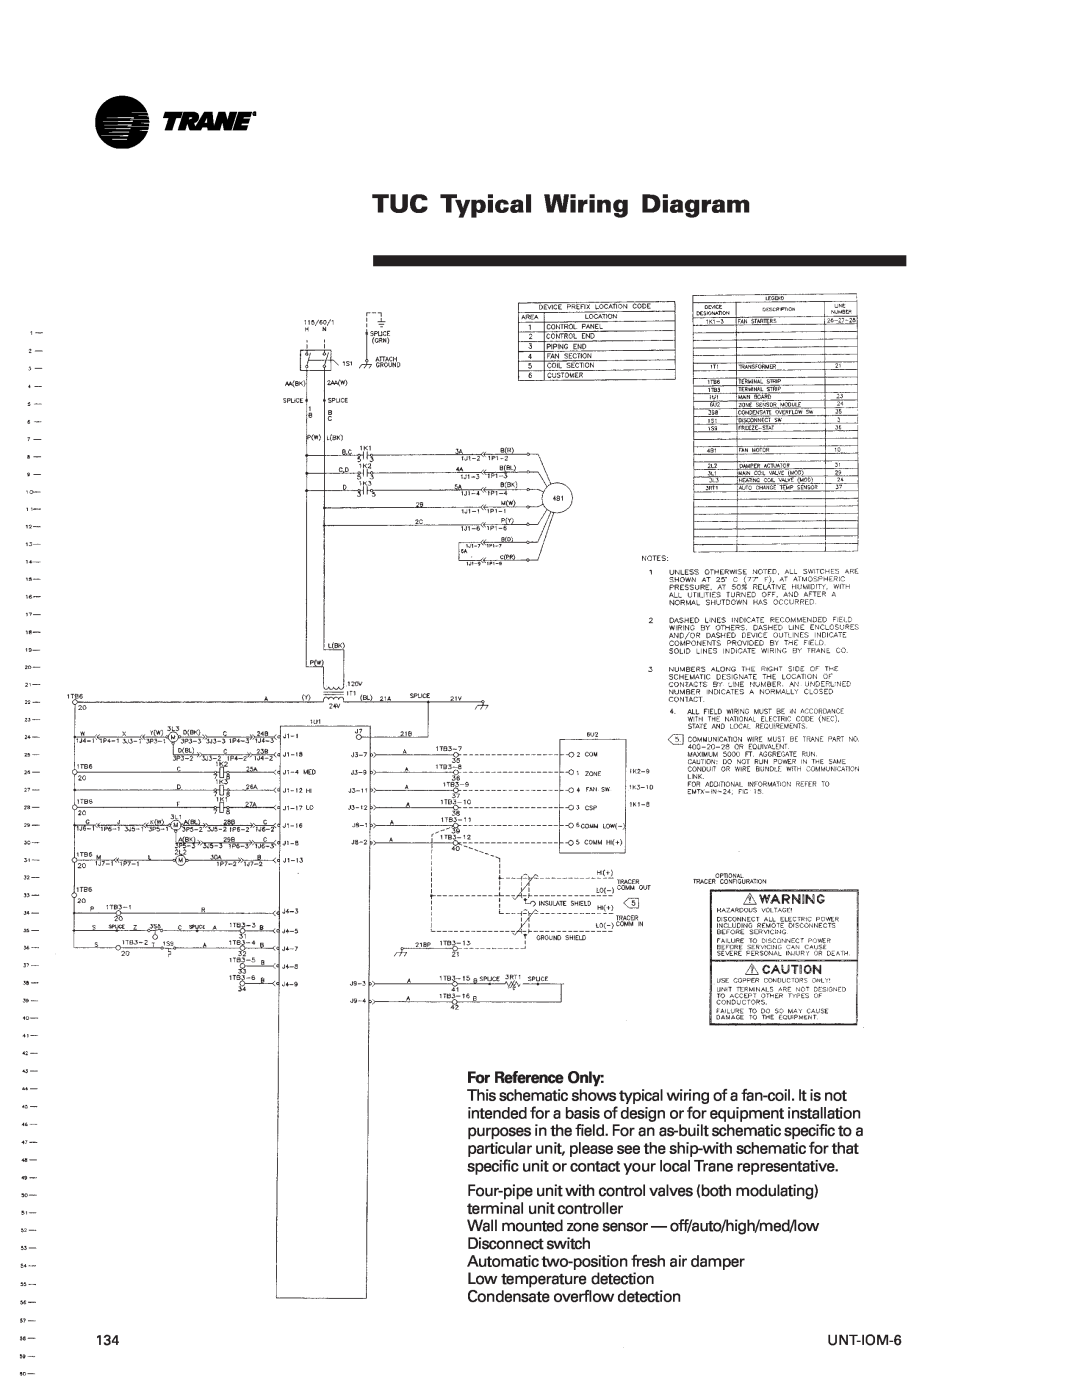 Trane LO manual TUC Typical Wiring Diagram, For Reference Only, UNT-IOM-6 